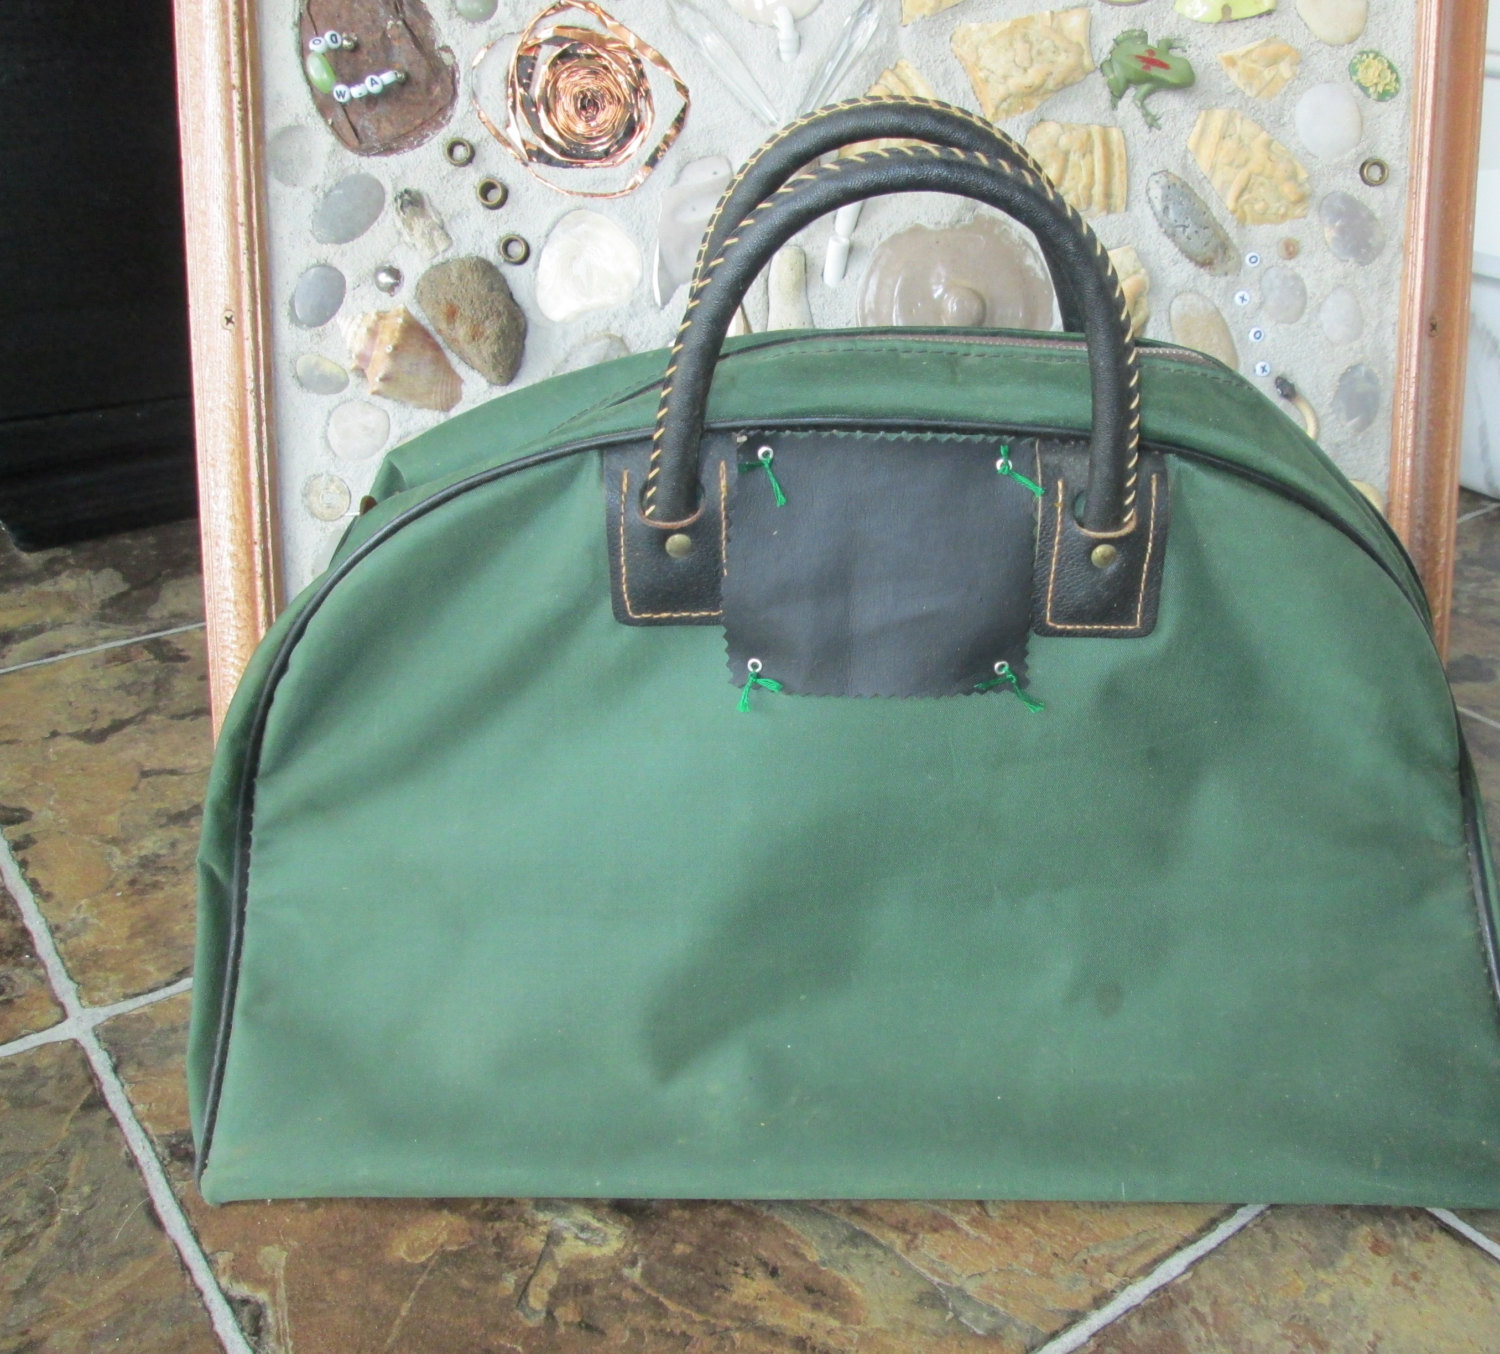 Vintage Retro Green Gym Bag from 1960's